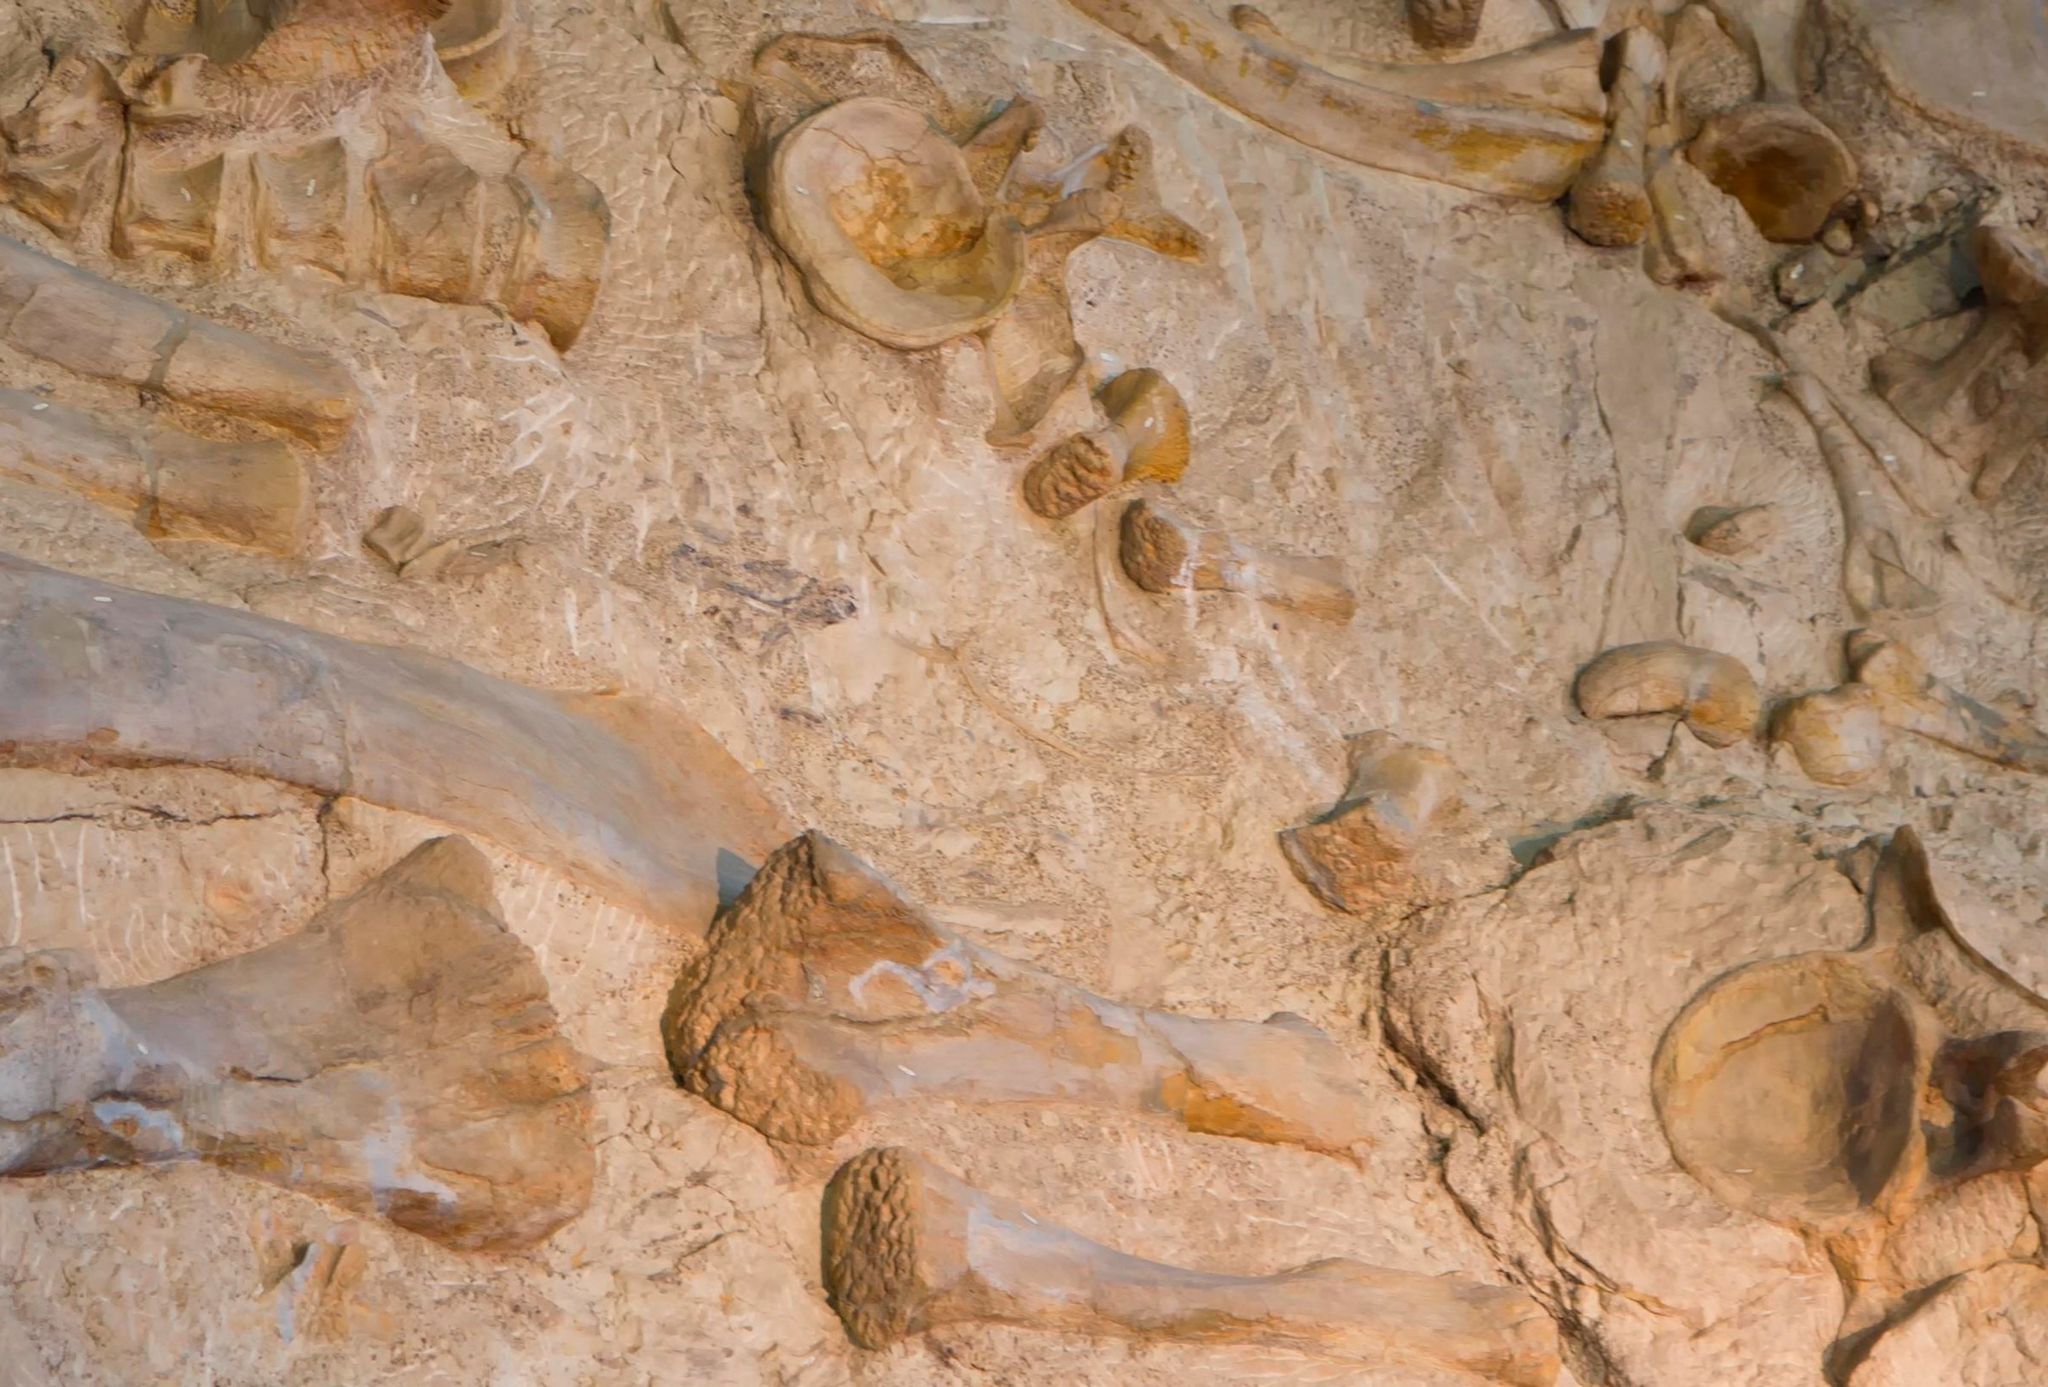 Bones of dinosaurs protrude from the rocky cliff face at Dinosaur National Monument.